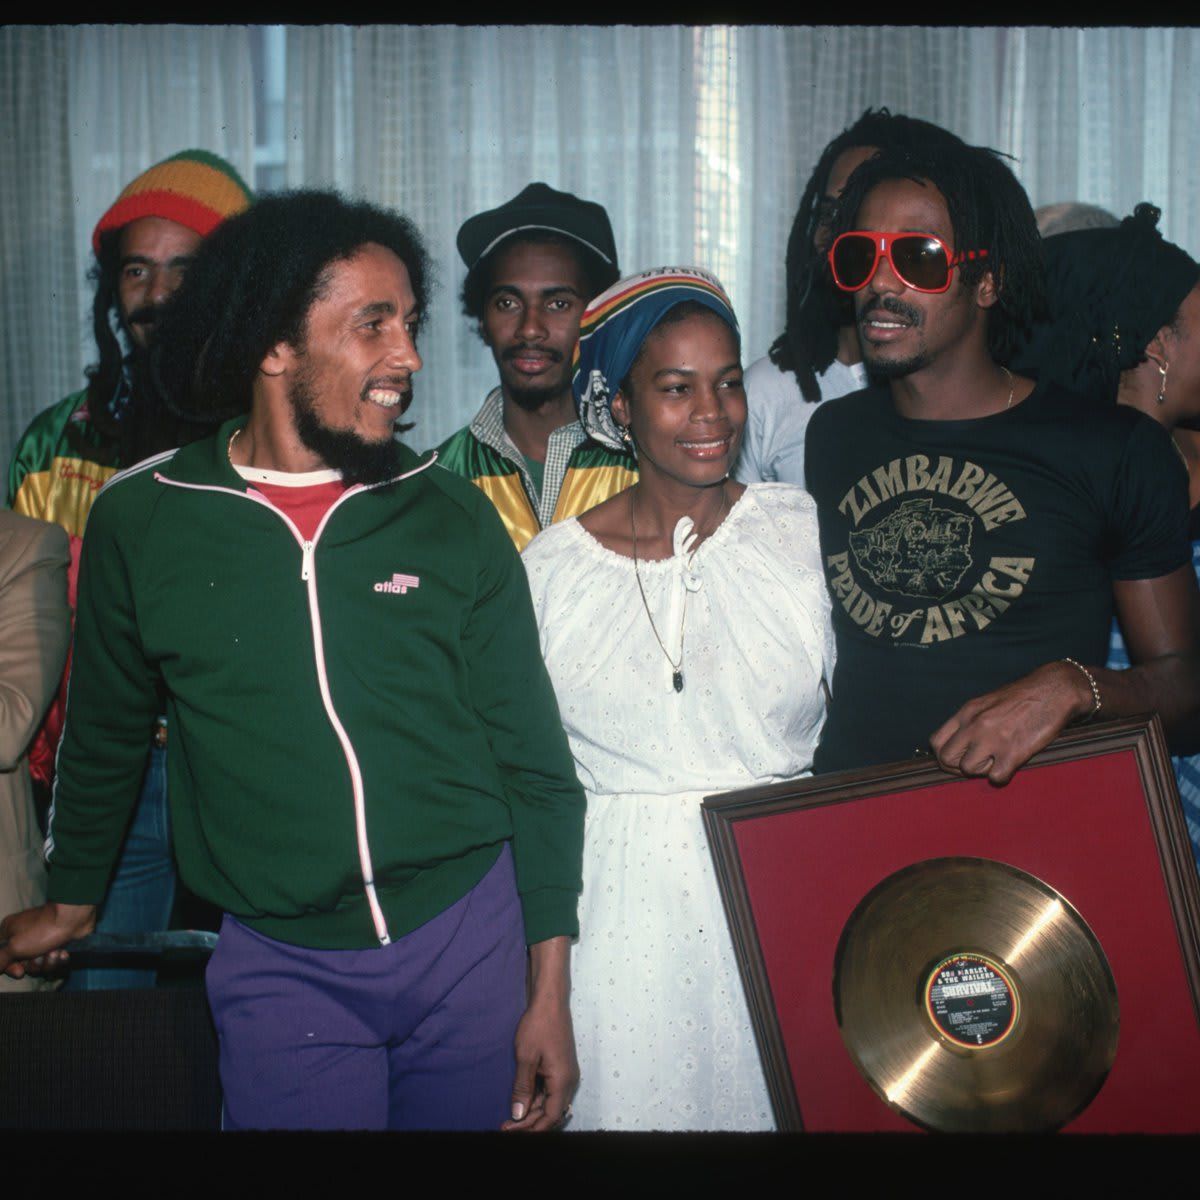 The Wailers at Gold Record Ceremony